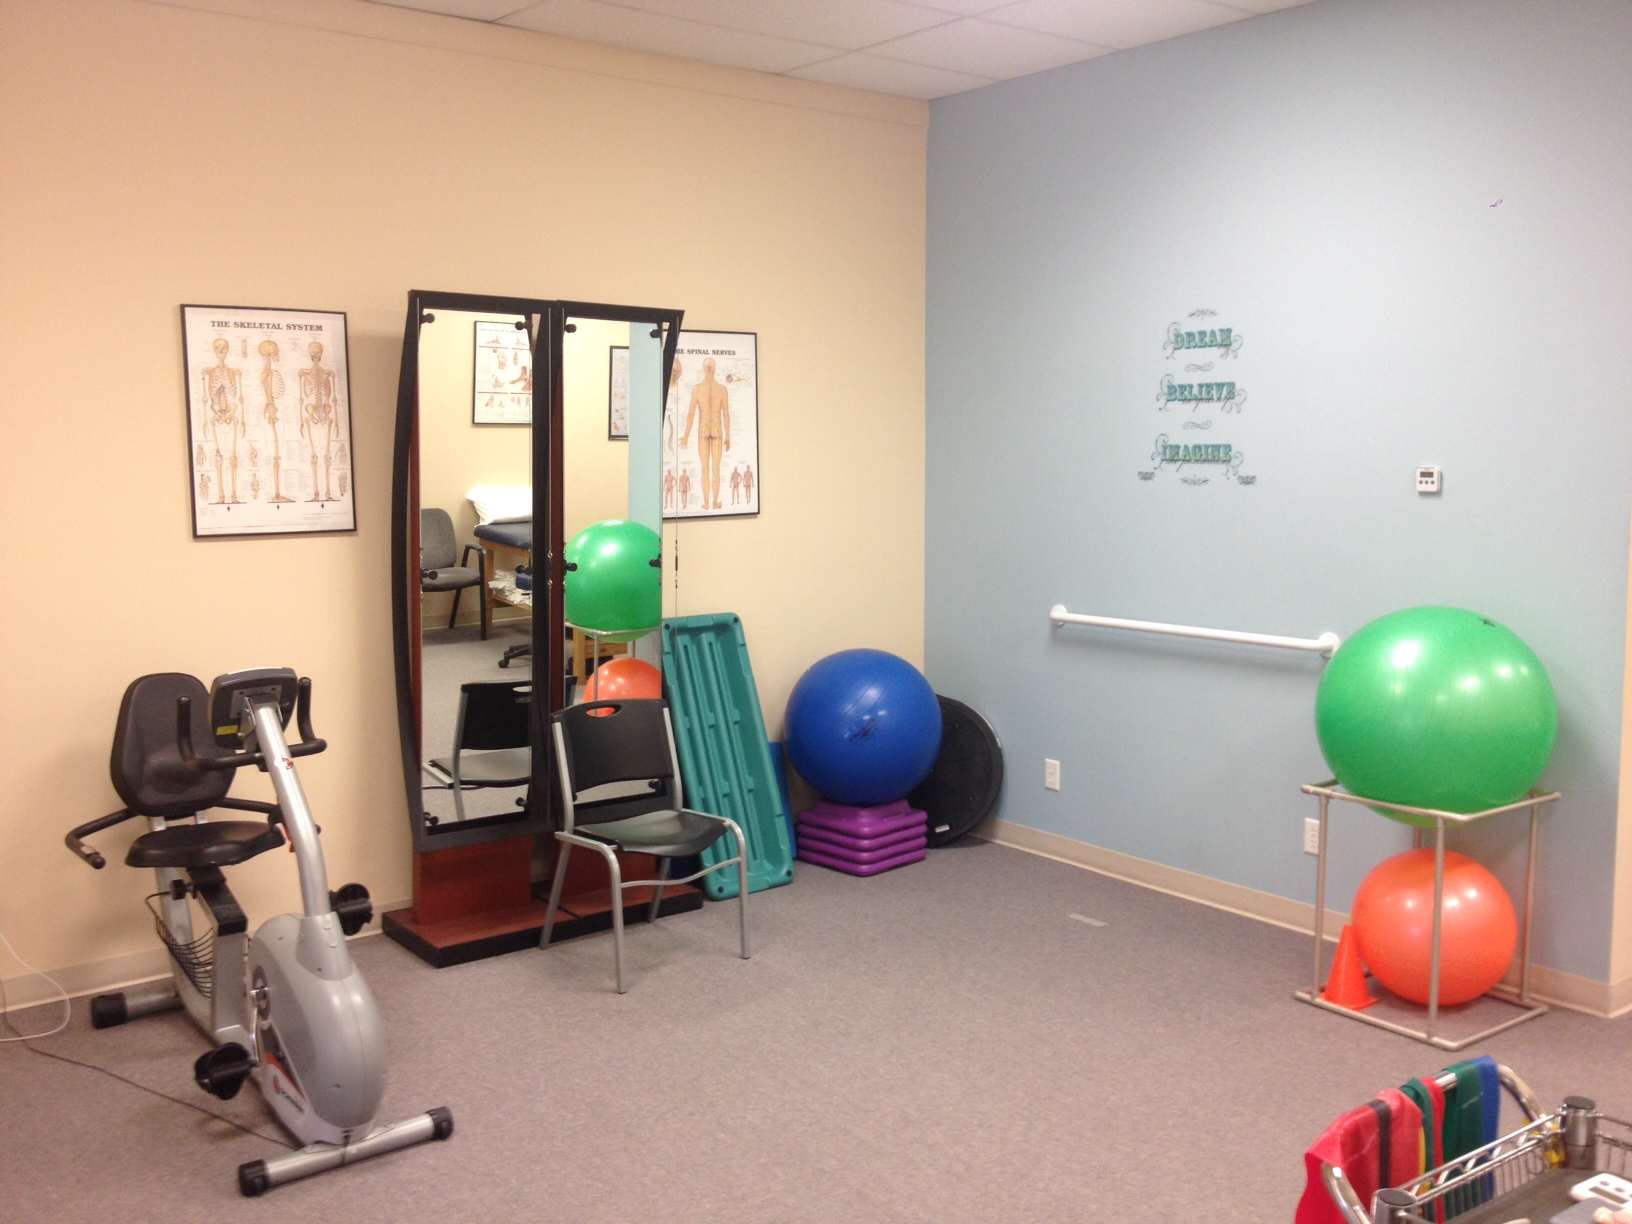 Athletico Physical Therapy - Lacon 320 5th St, Lacon Illinois 61540